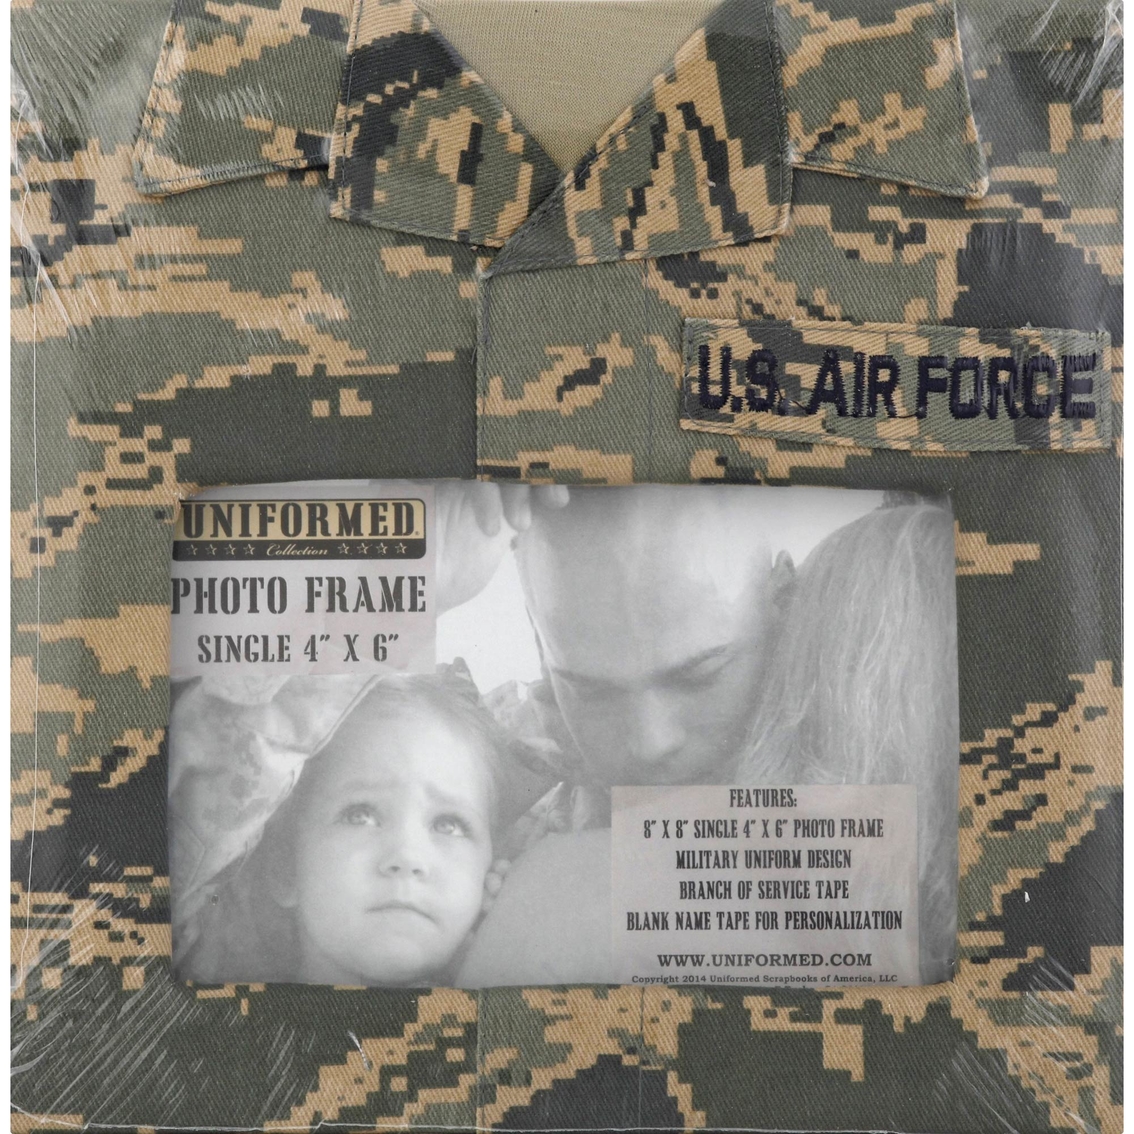 Uniformed Air Force Picture Frame - Image 2 of 2